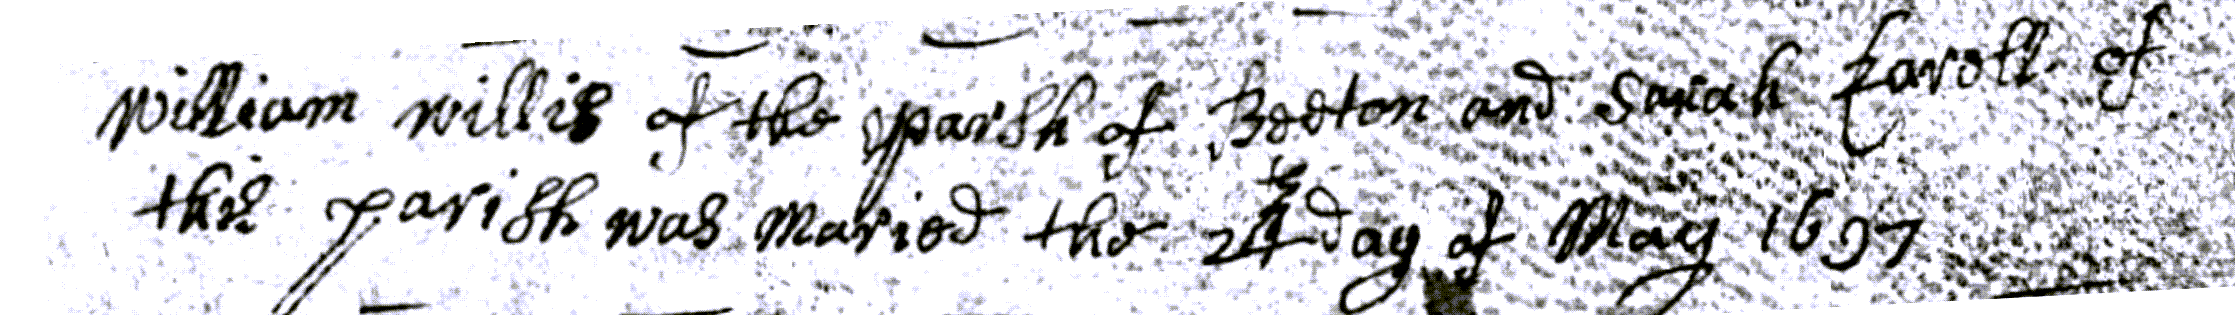 Figure 1: Marriage Register Entry for William Willis and Sarah Carrol